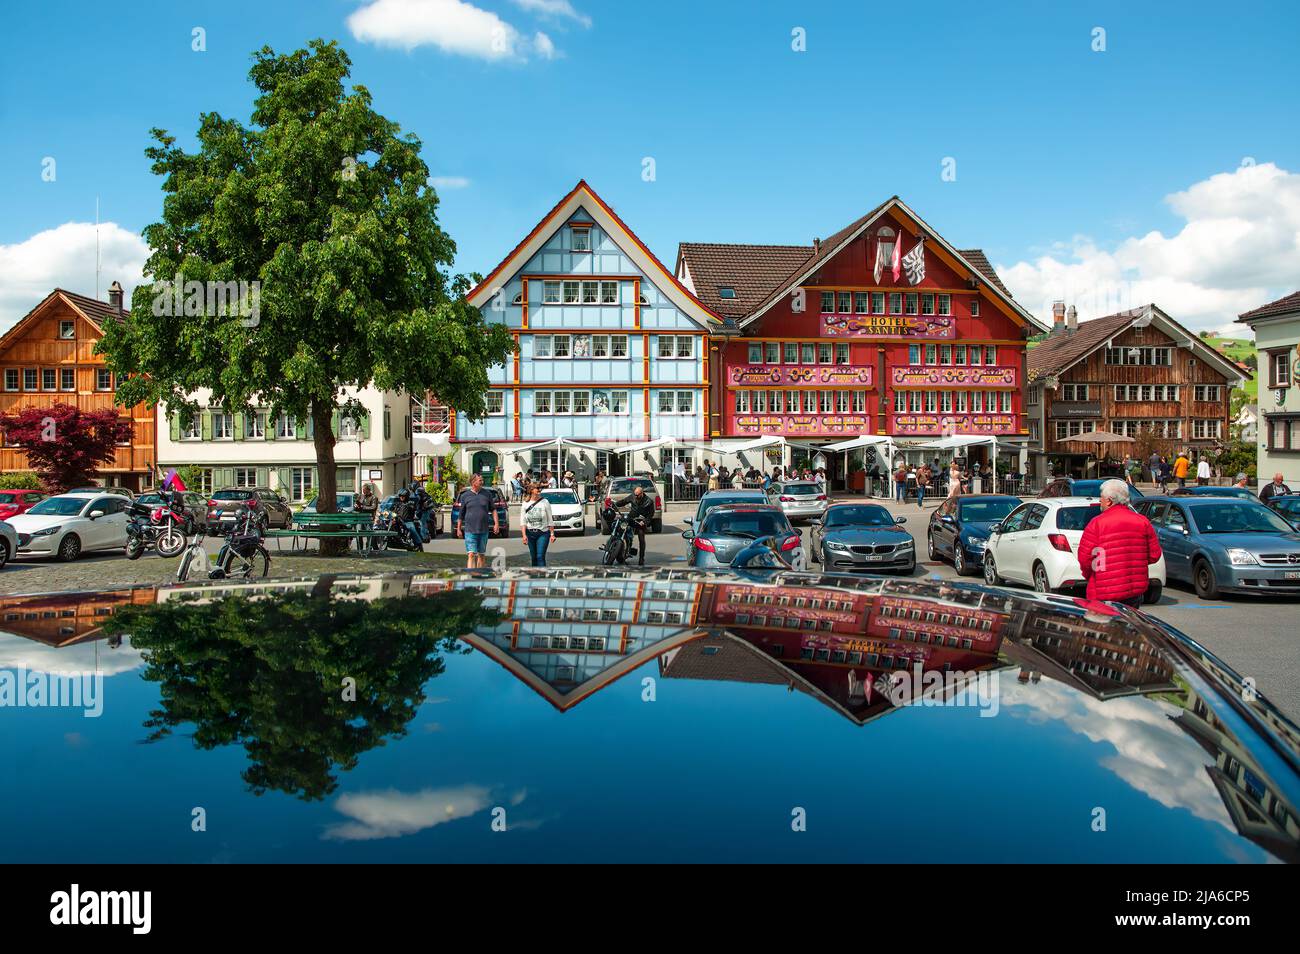 Appenzell, Switzerland - May 27, 2022: The main square in Appenzell, Switzerland, where voters still vote by raising of hands Stock Photo